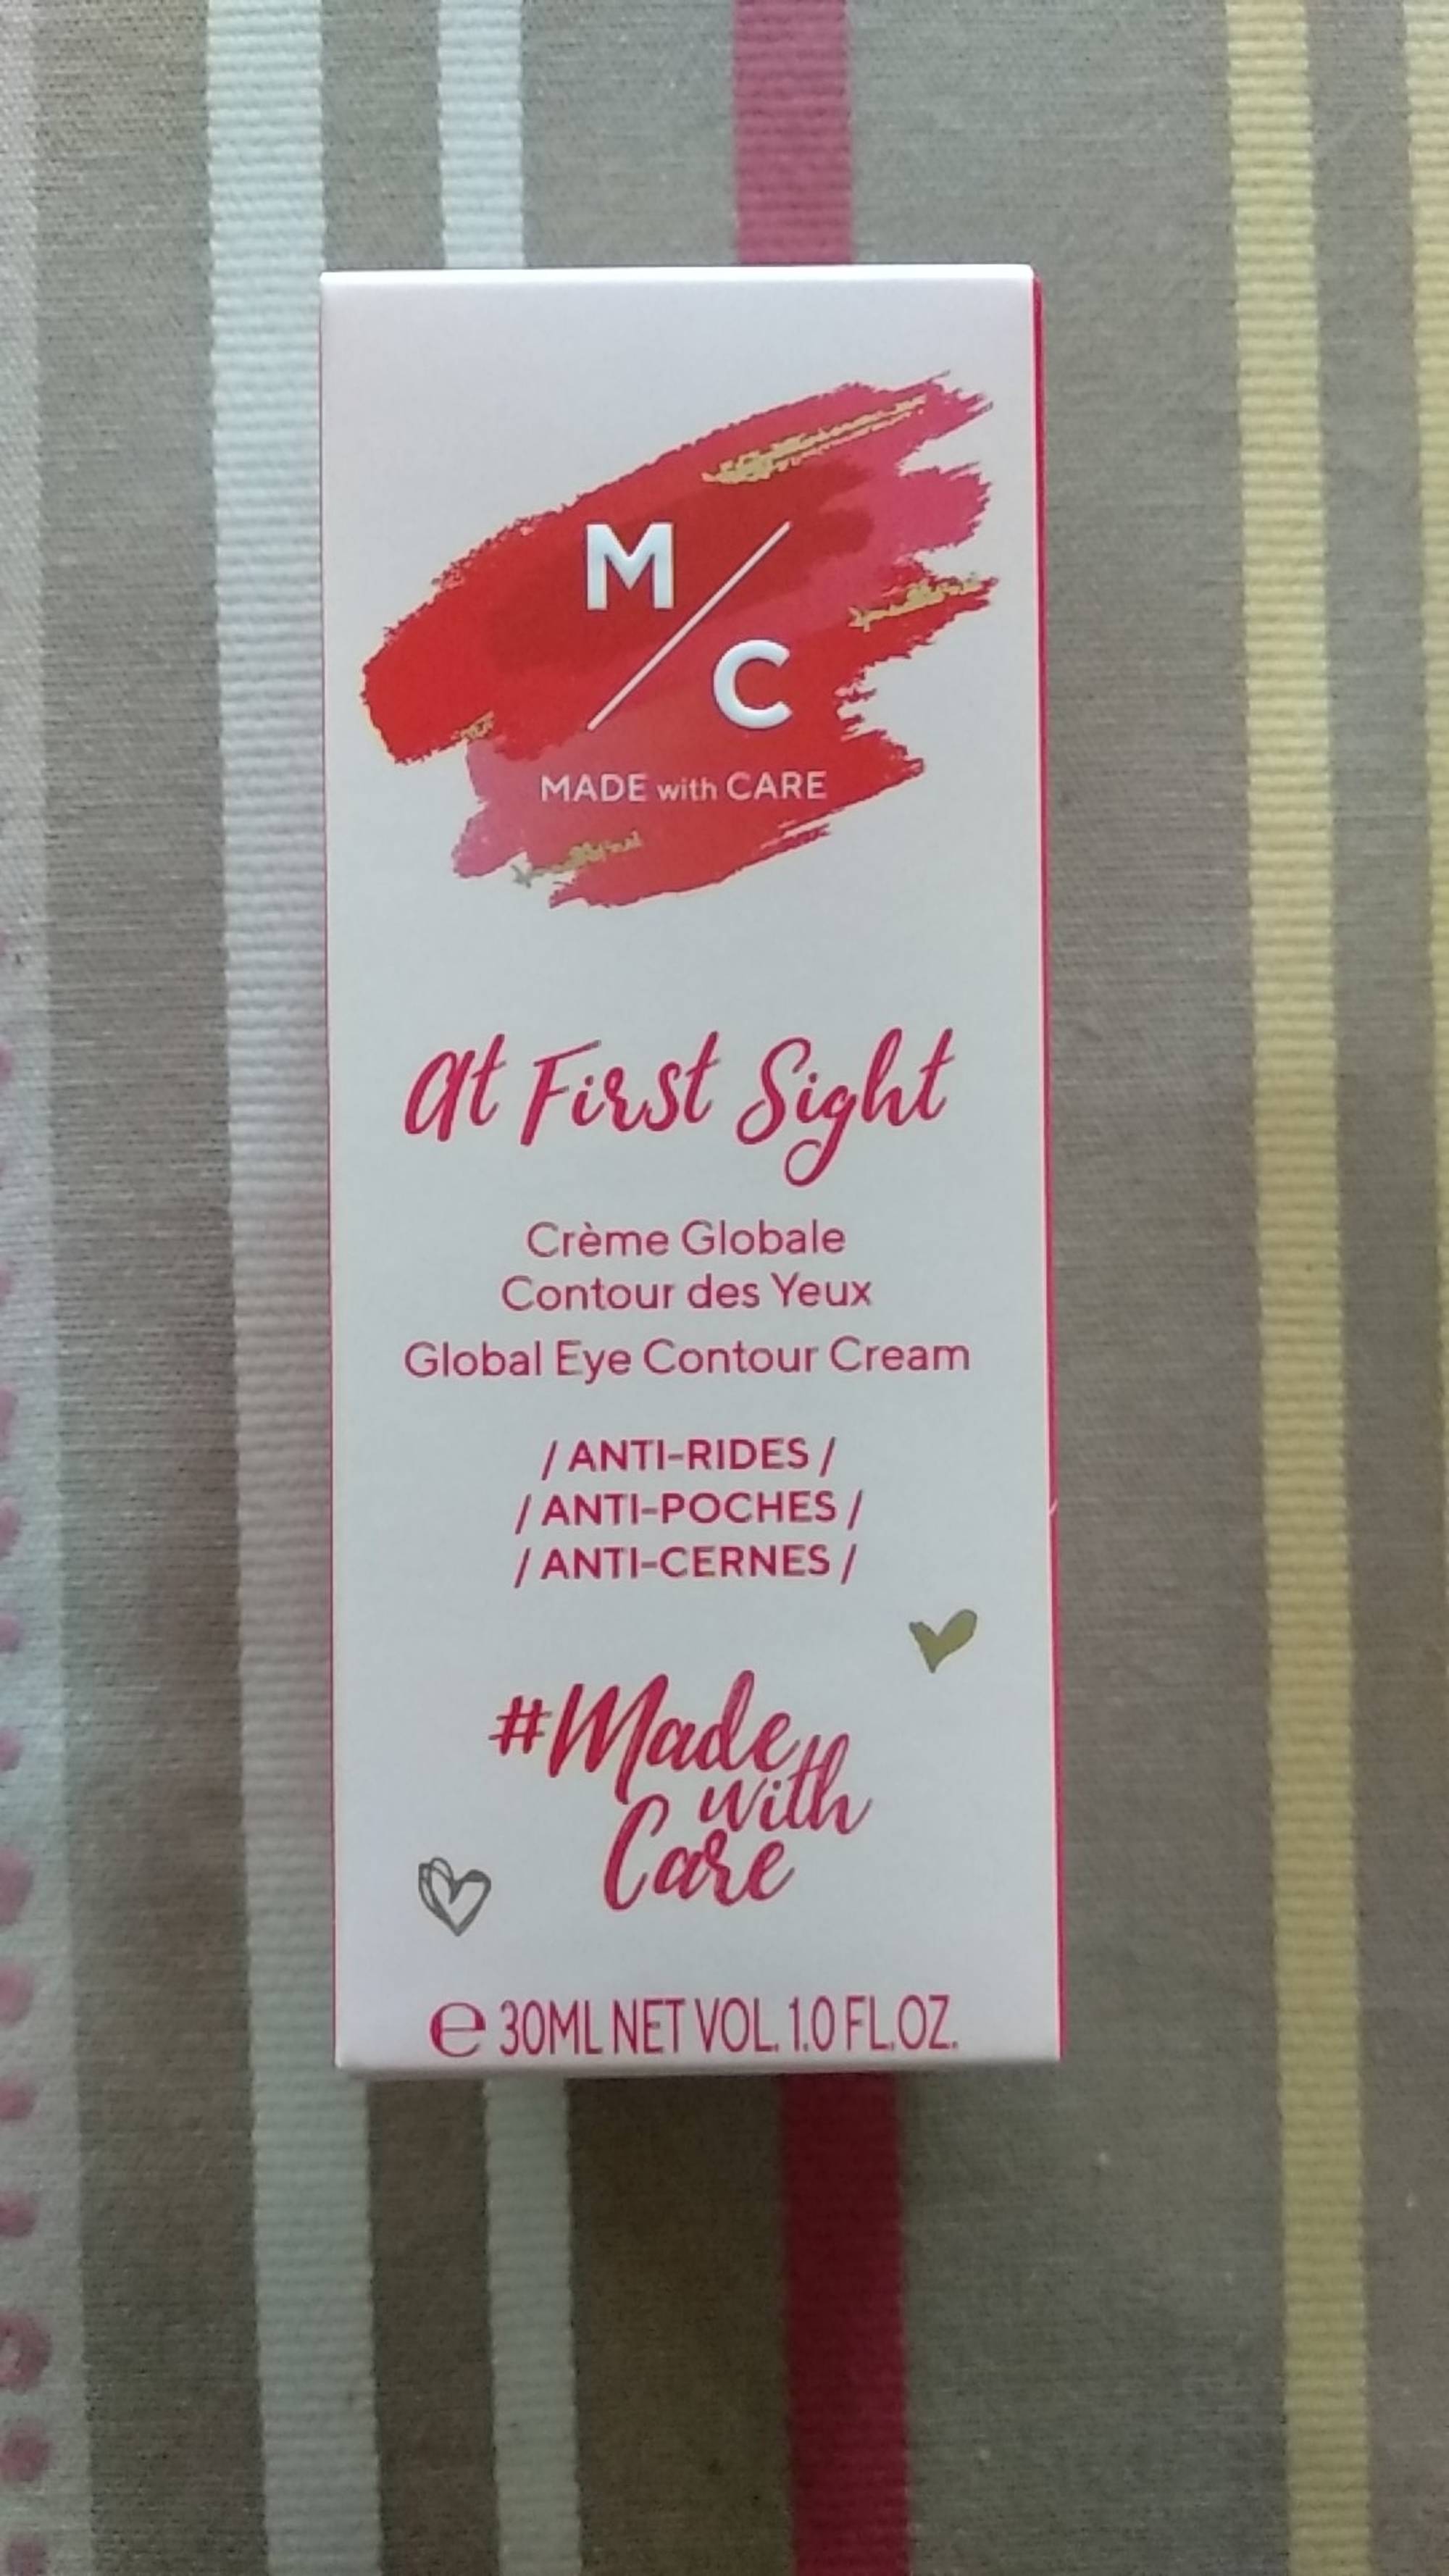 MADE WITH CARE - At first sight - Crème globale contour des yeux